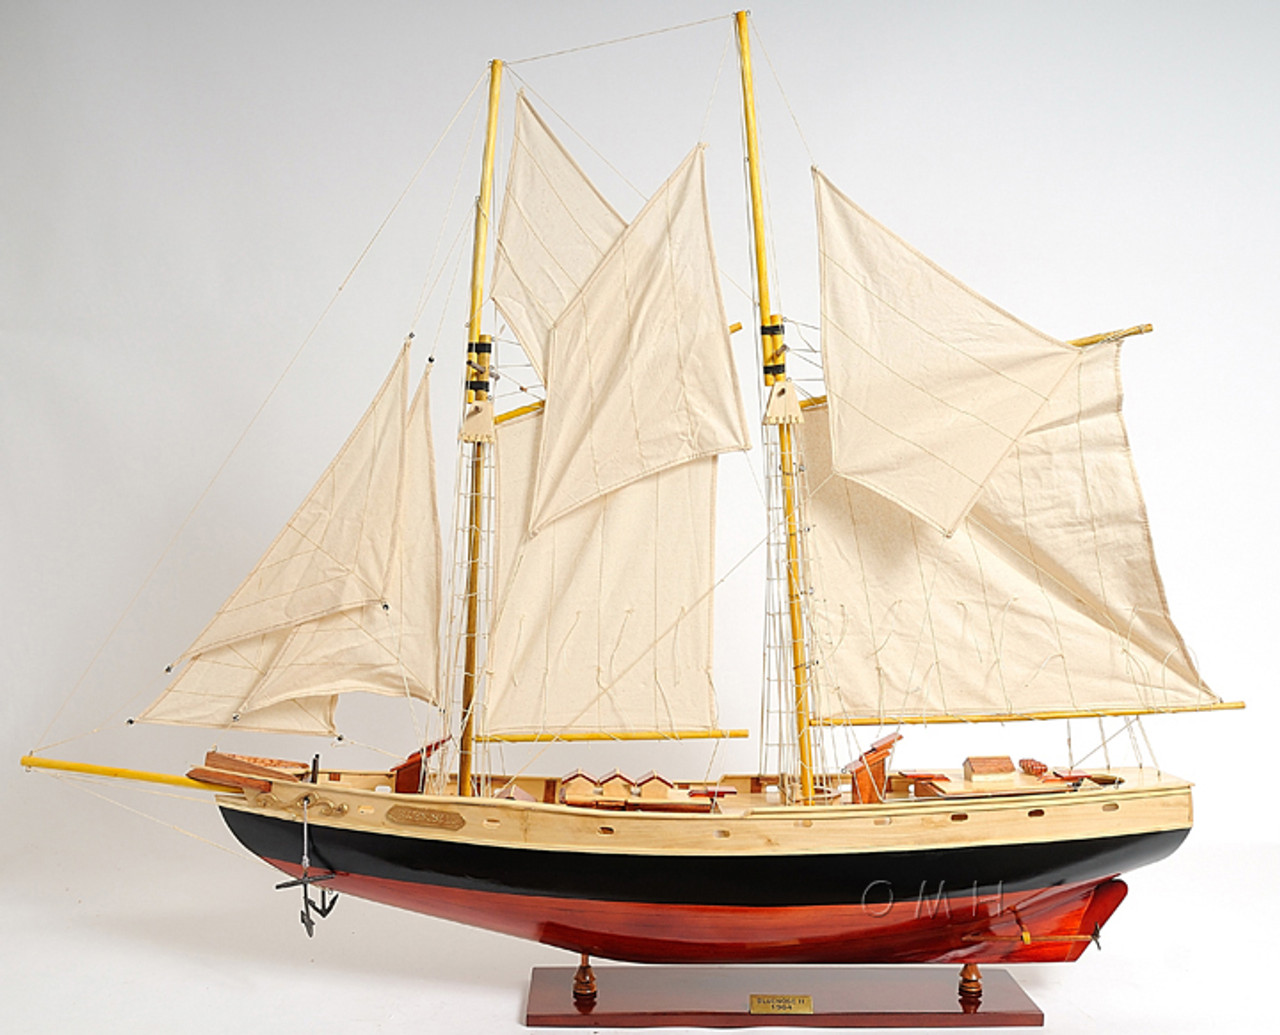 pictures of model sailboats